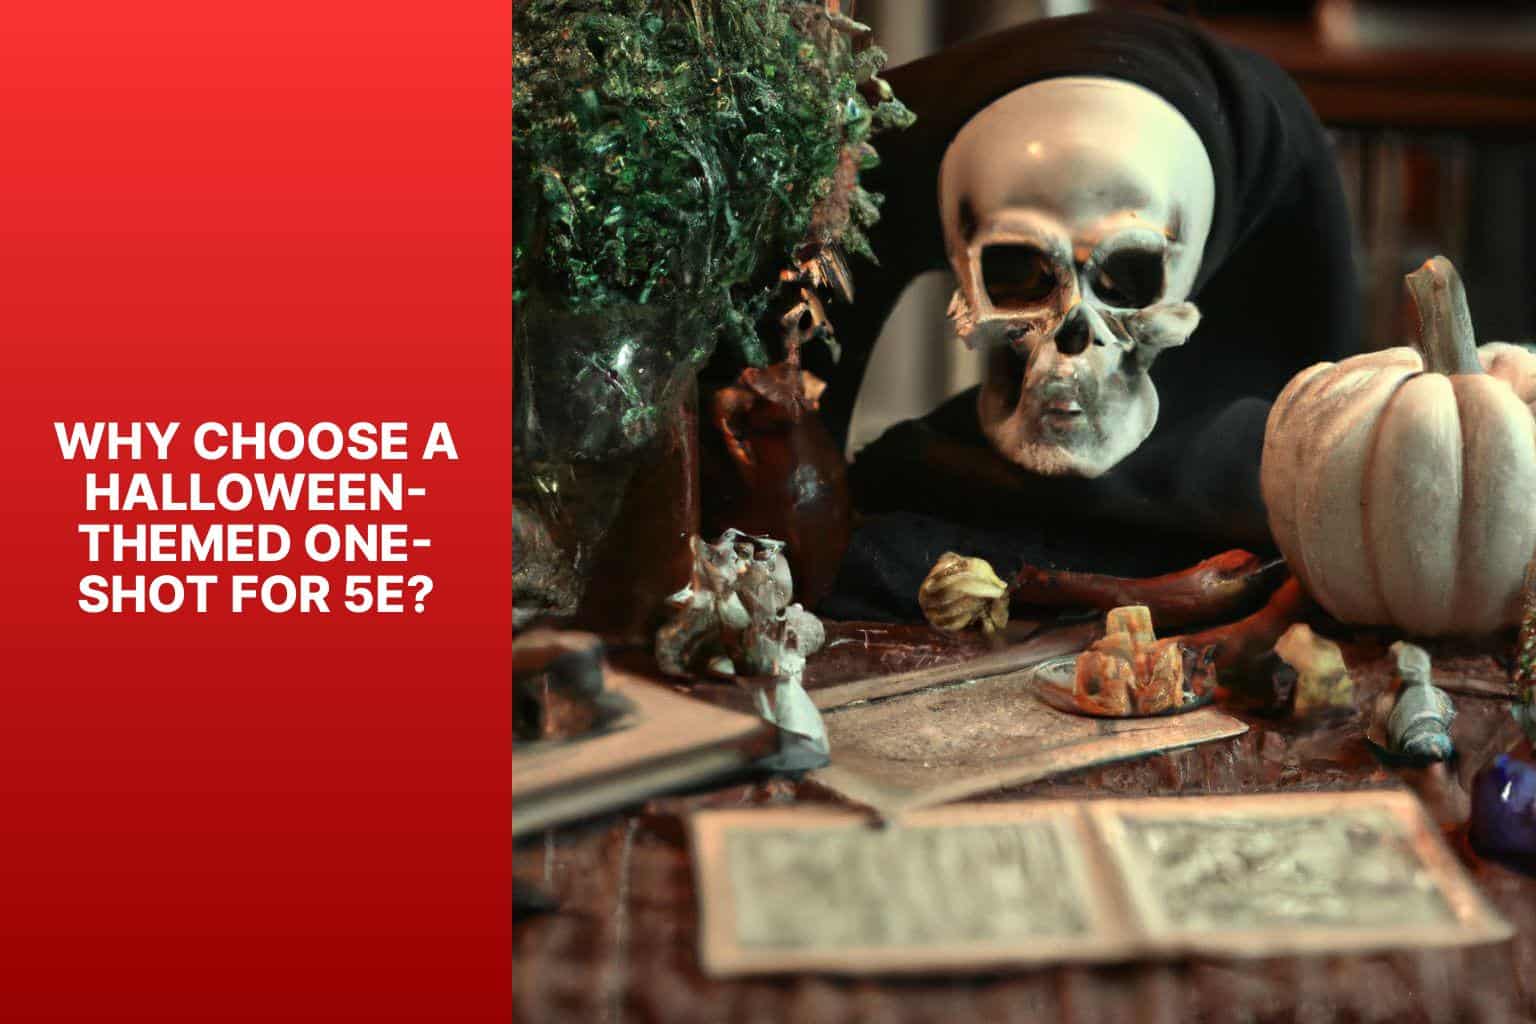 Why Choose a Halloween-Themed One-Shot for 5e? - best halloween one shot 5e 